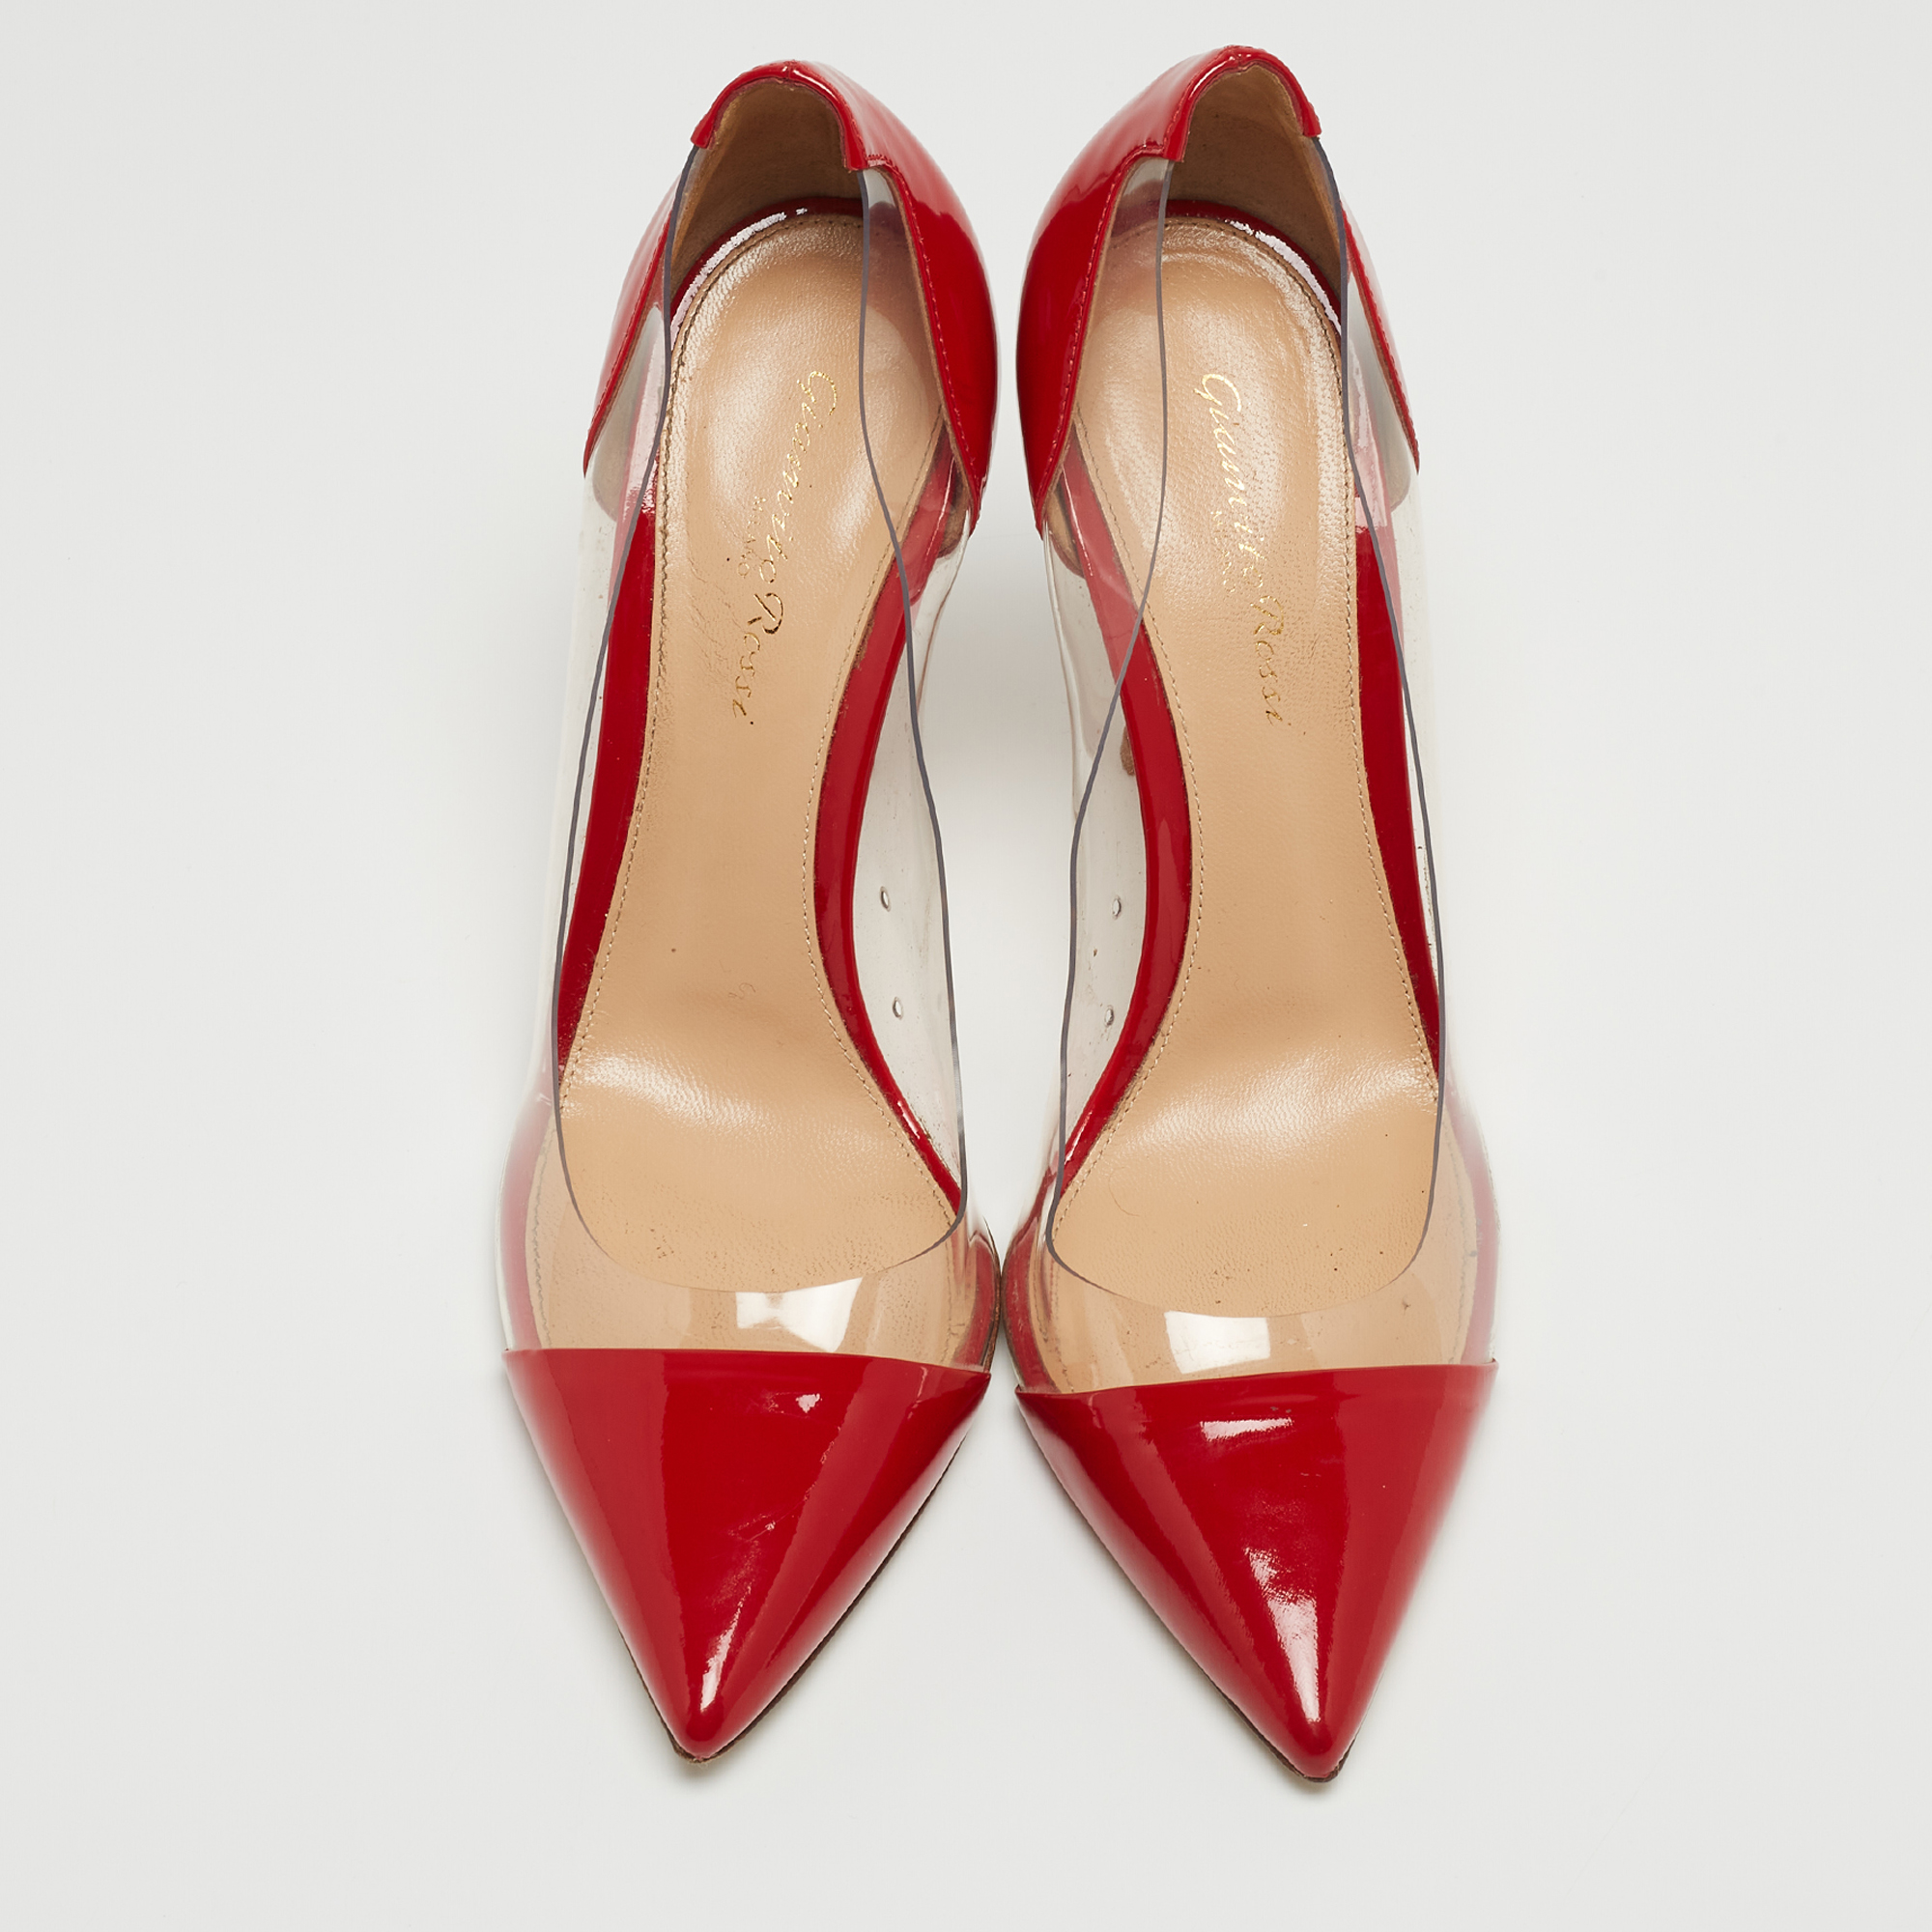 Gianvito Rossi Red Patent Leather And PVC Plexi Pumps Size 39